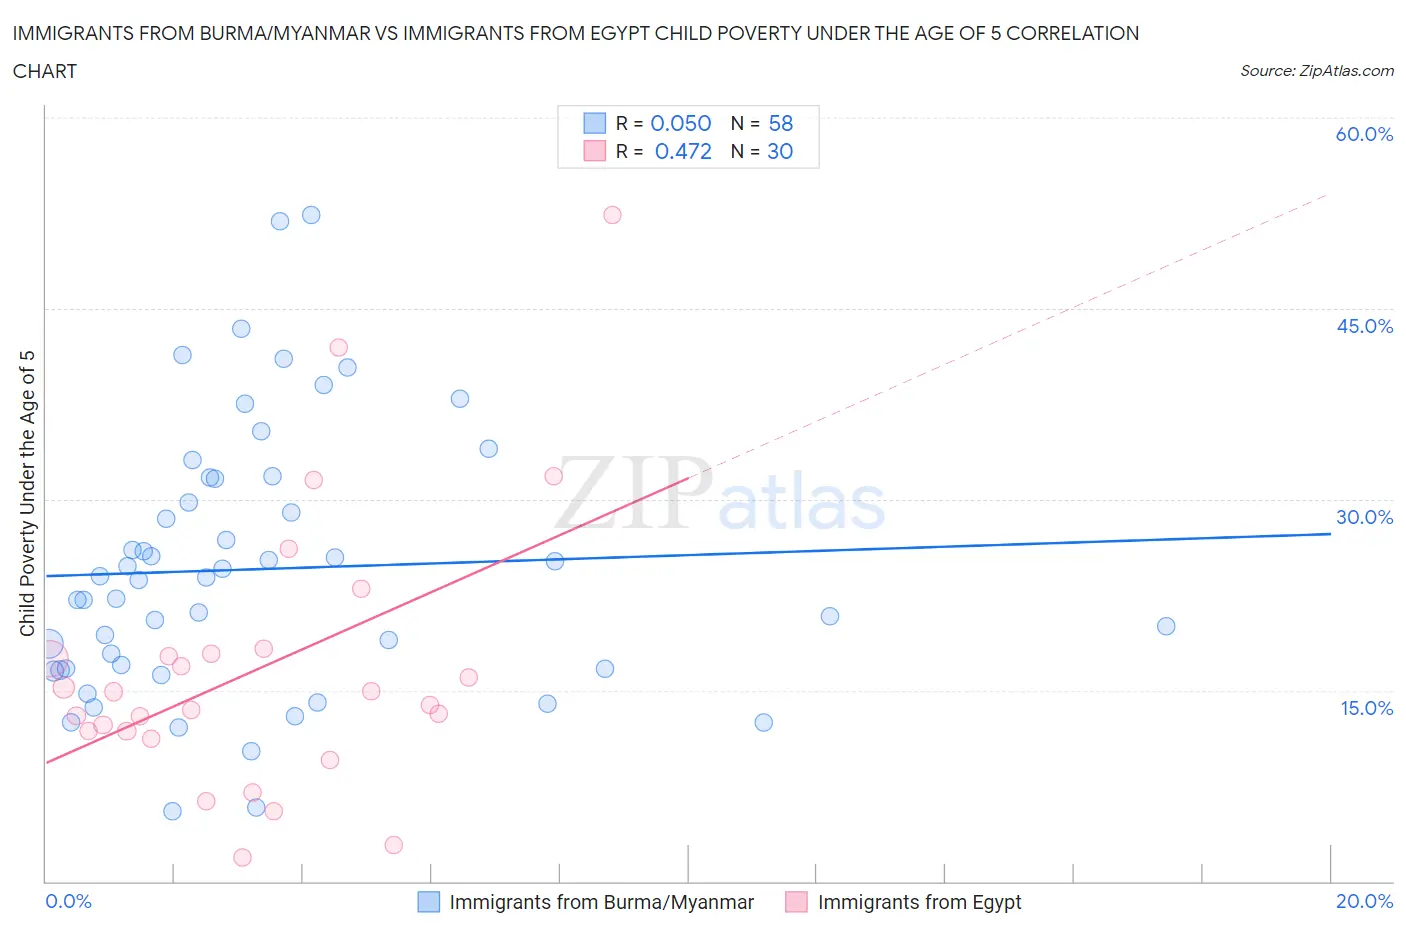 Immigrants from Burma/Myanmar vs Immigrants from Egypt Child Poverty Under the Age of 5